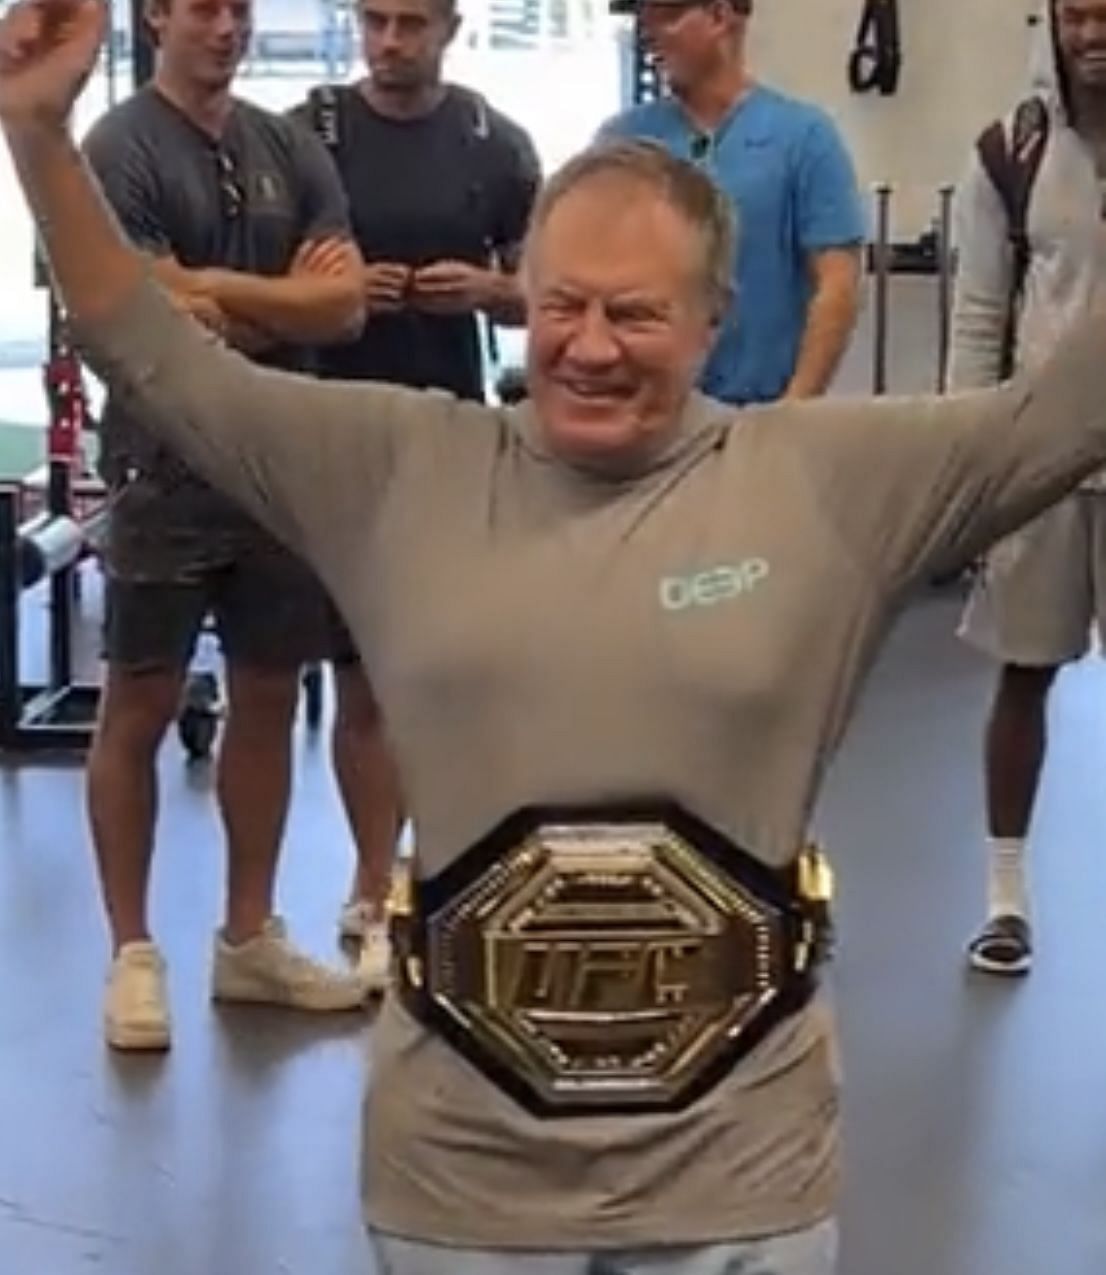 Bill Belichick proudly shows off his UFC title belt